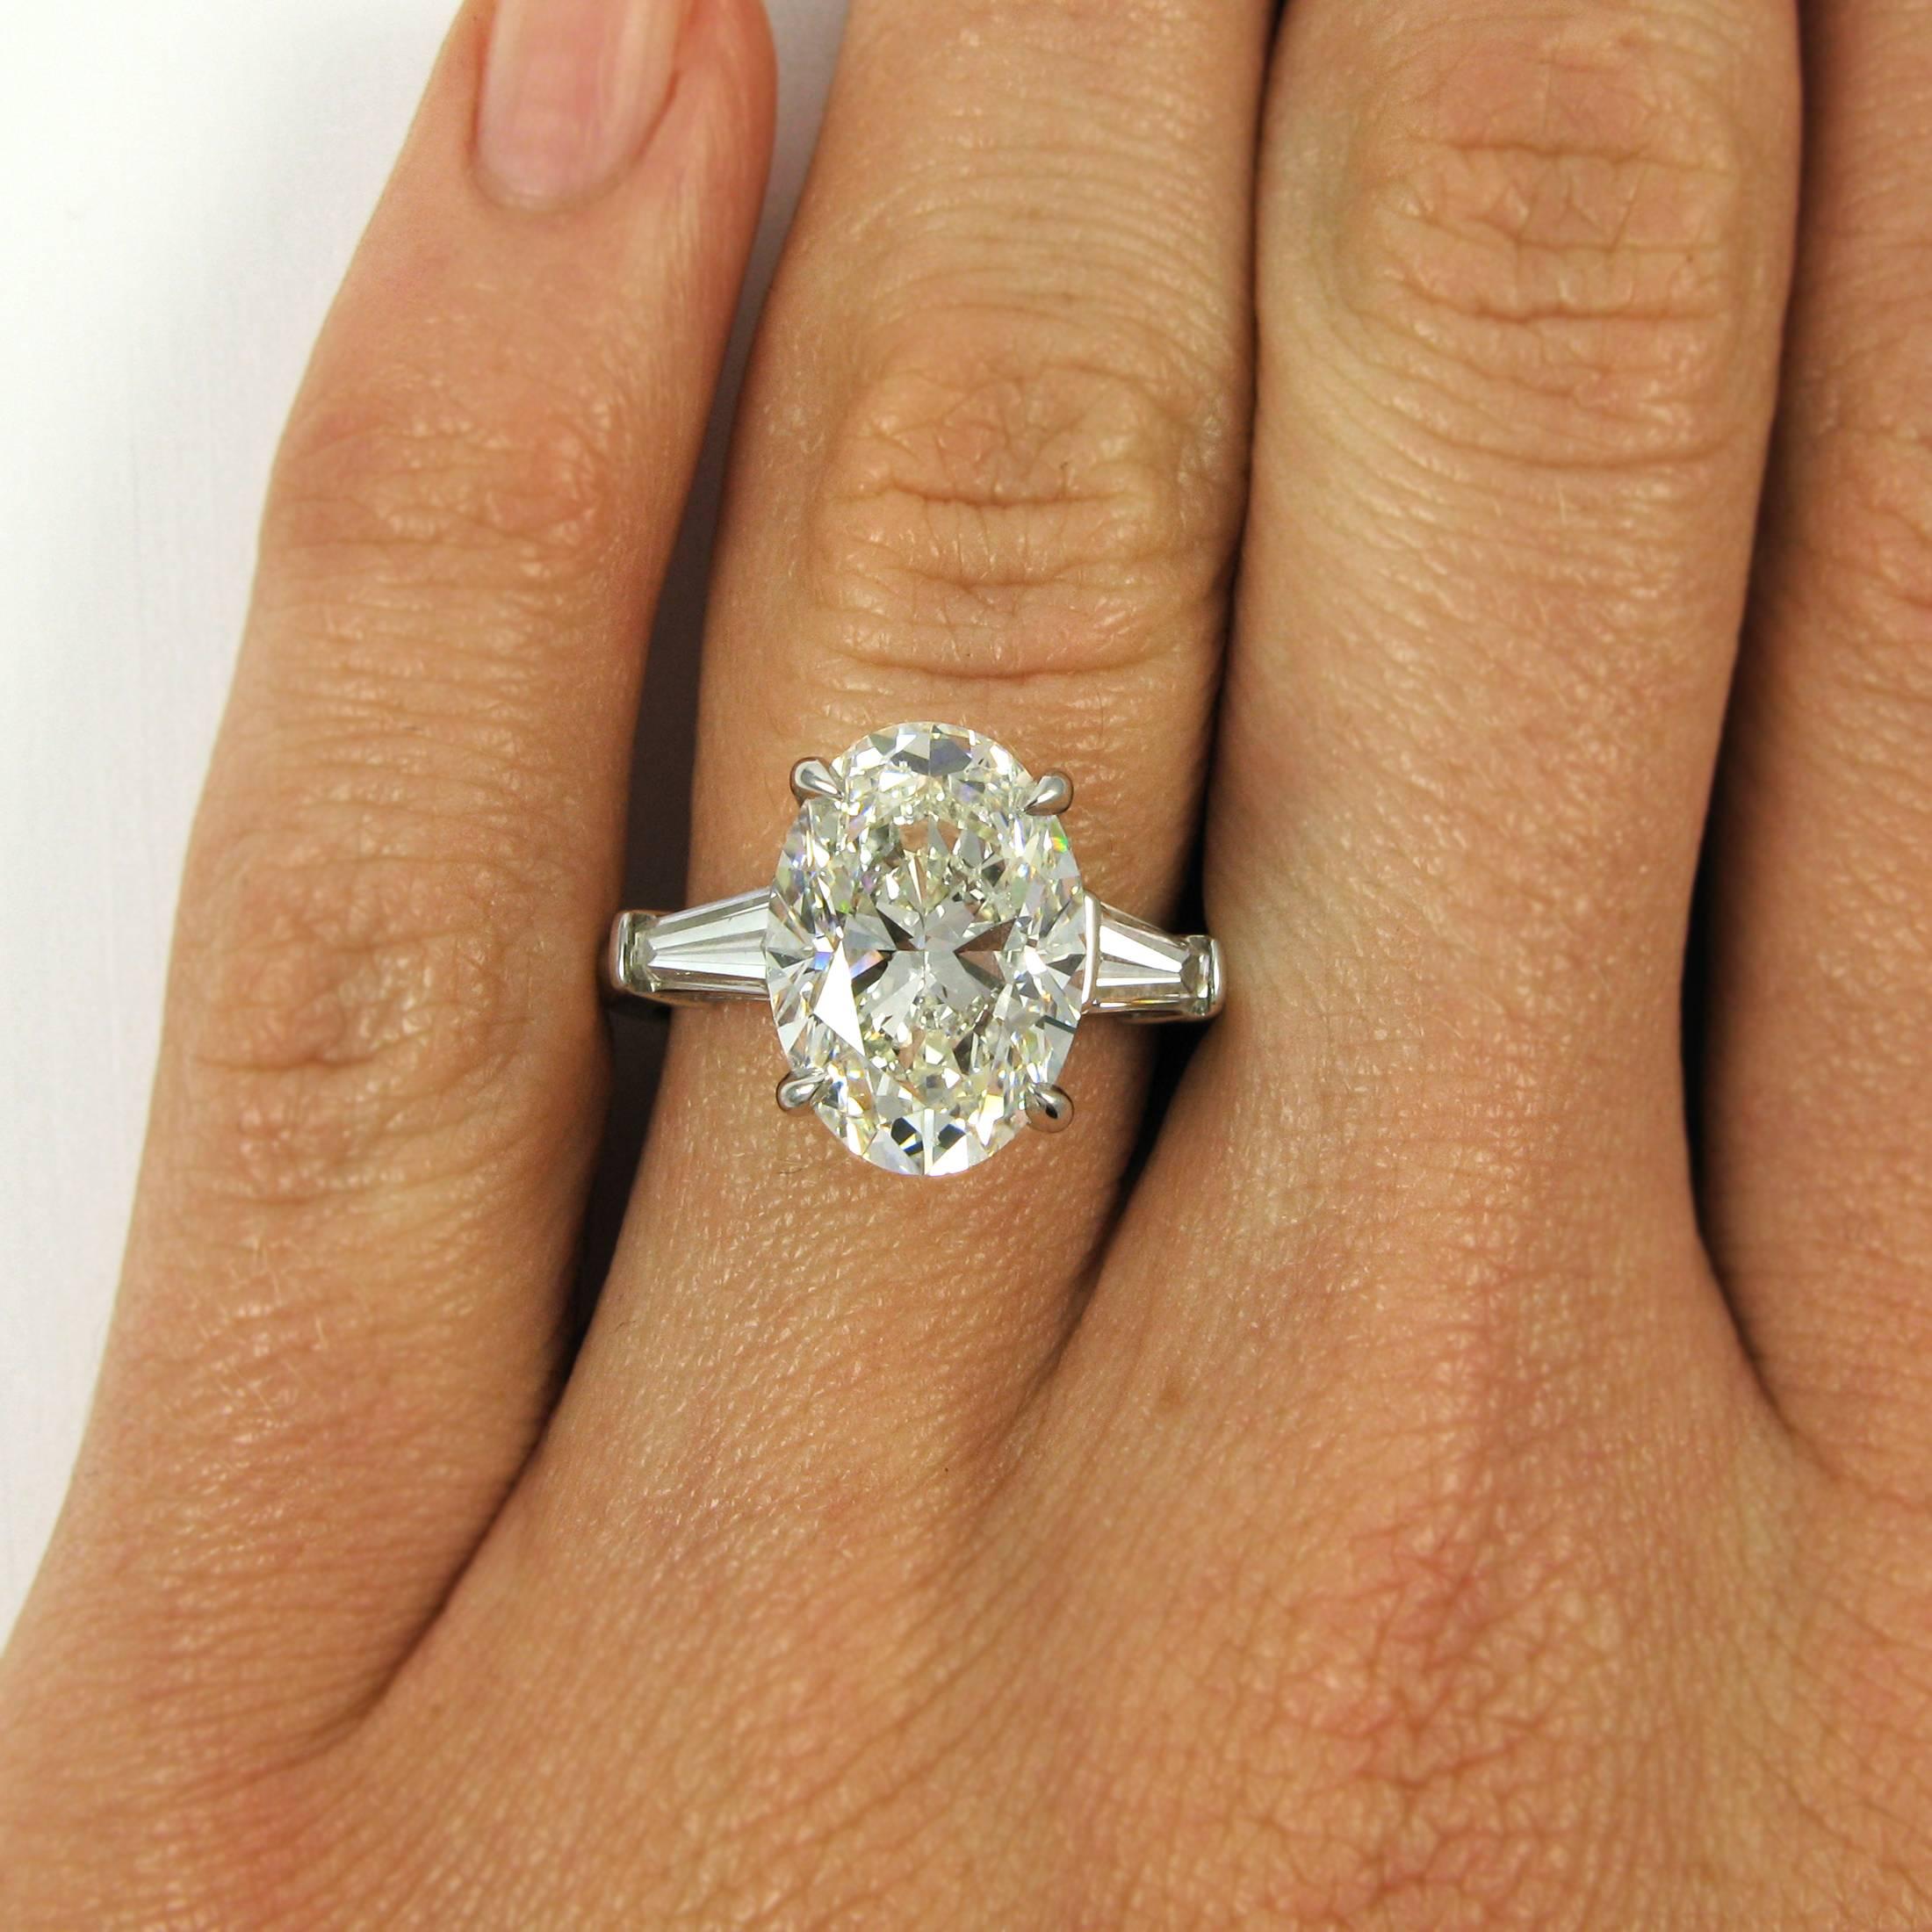 A stunning classic ring centering on a 5.01 carat oval-cut diamond with I color and SI1 clarity flanked by two tapered baguettes totaling approx. 1.10 carats. Mounted in platinum. 

Accompanied by GIA Diamond Grading Report 5151882302, which states